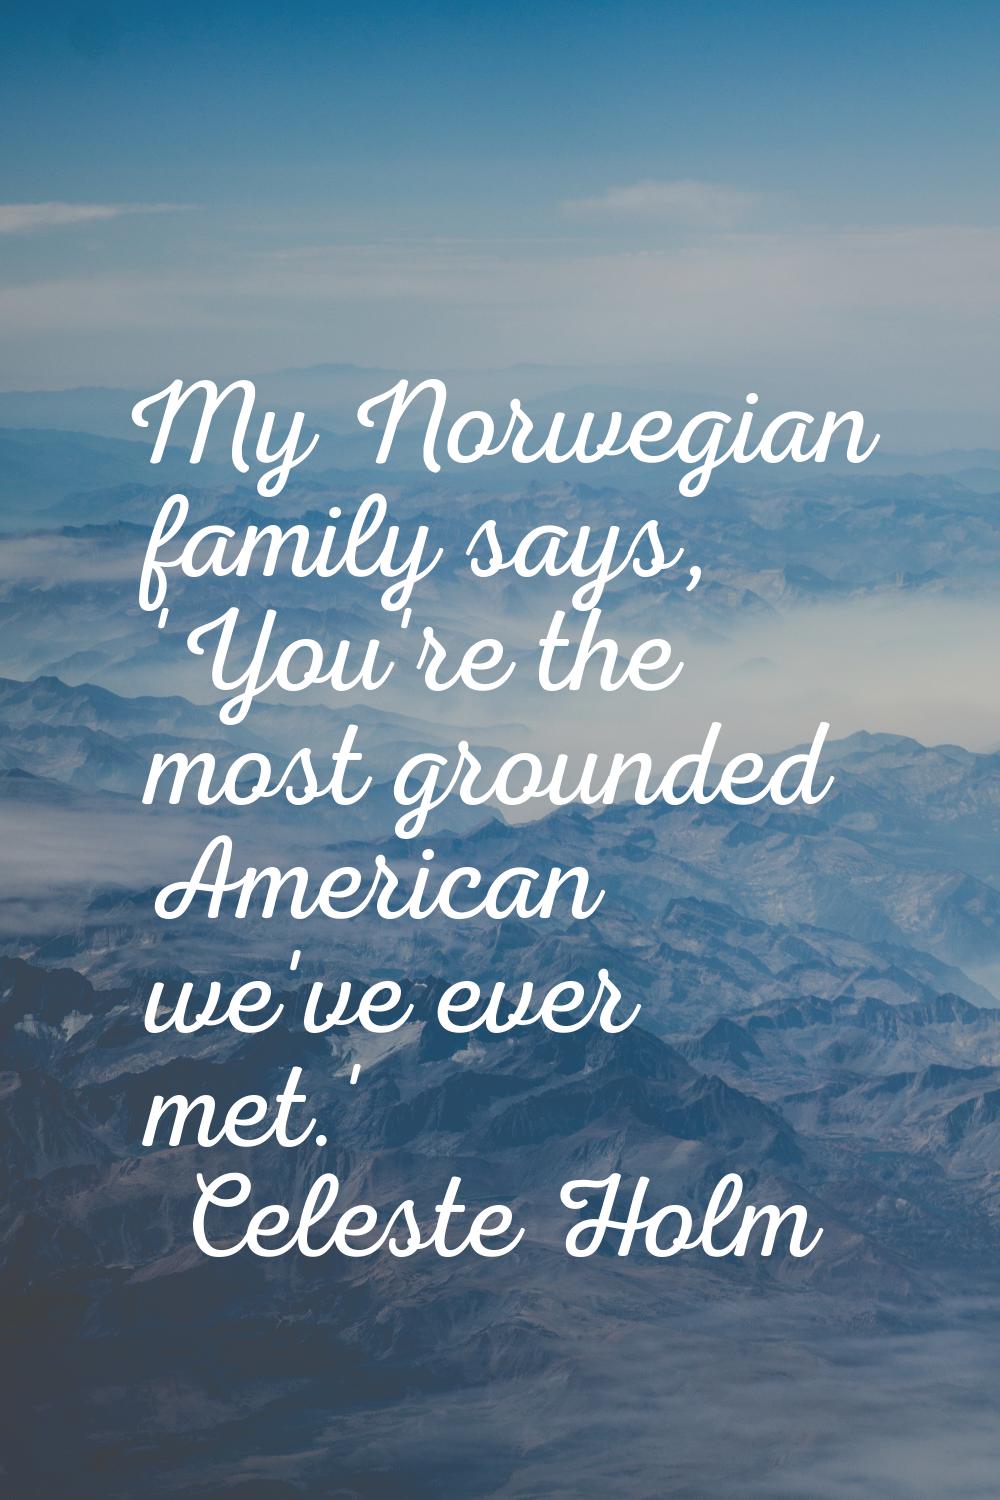 My Norwegian family says, 'You're the most grounded American we've ever met.'